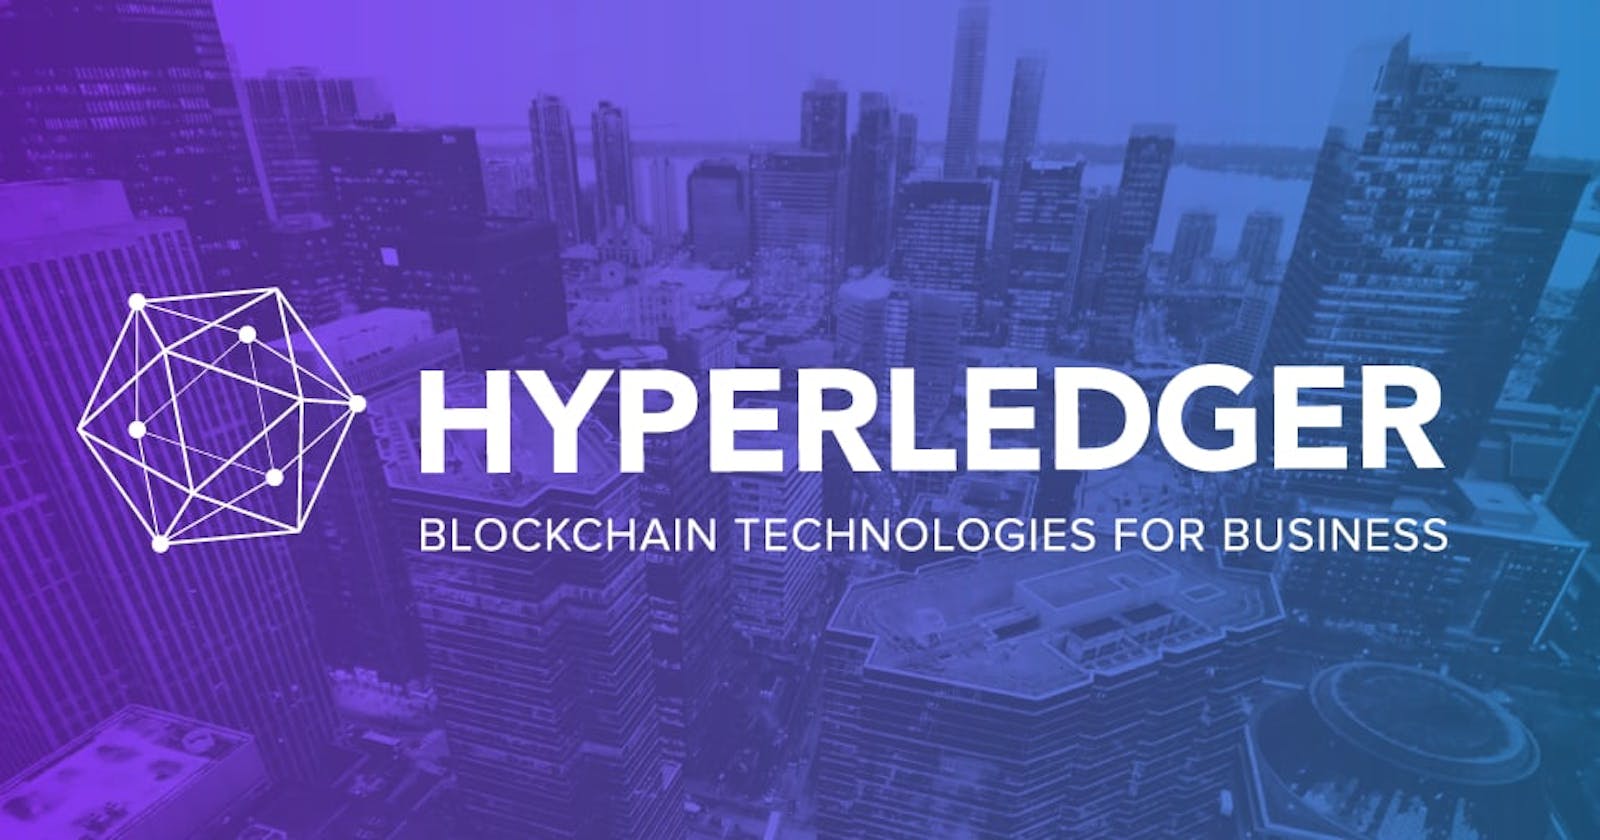 Hyperledger vs Ethereum - Which one is more beneficial?